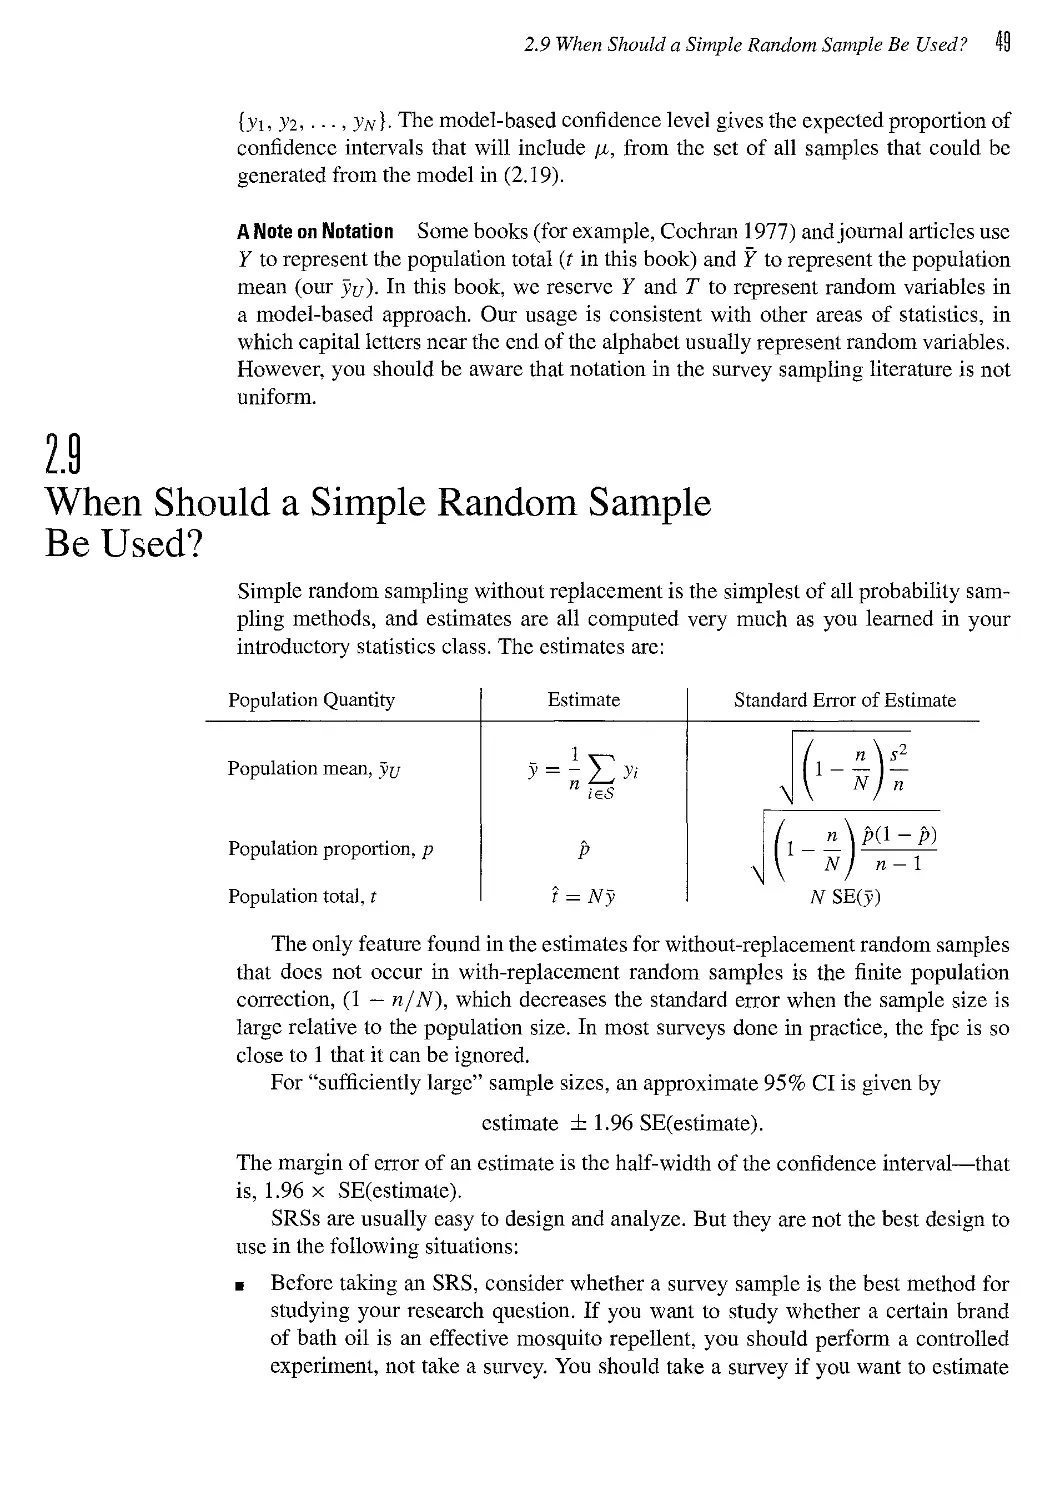 2.9 When Should a Simple Random Sample Be Used?